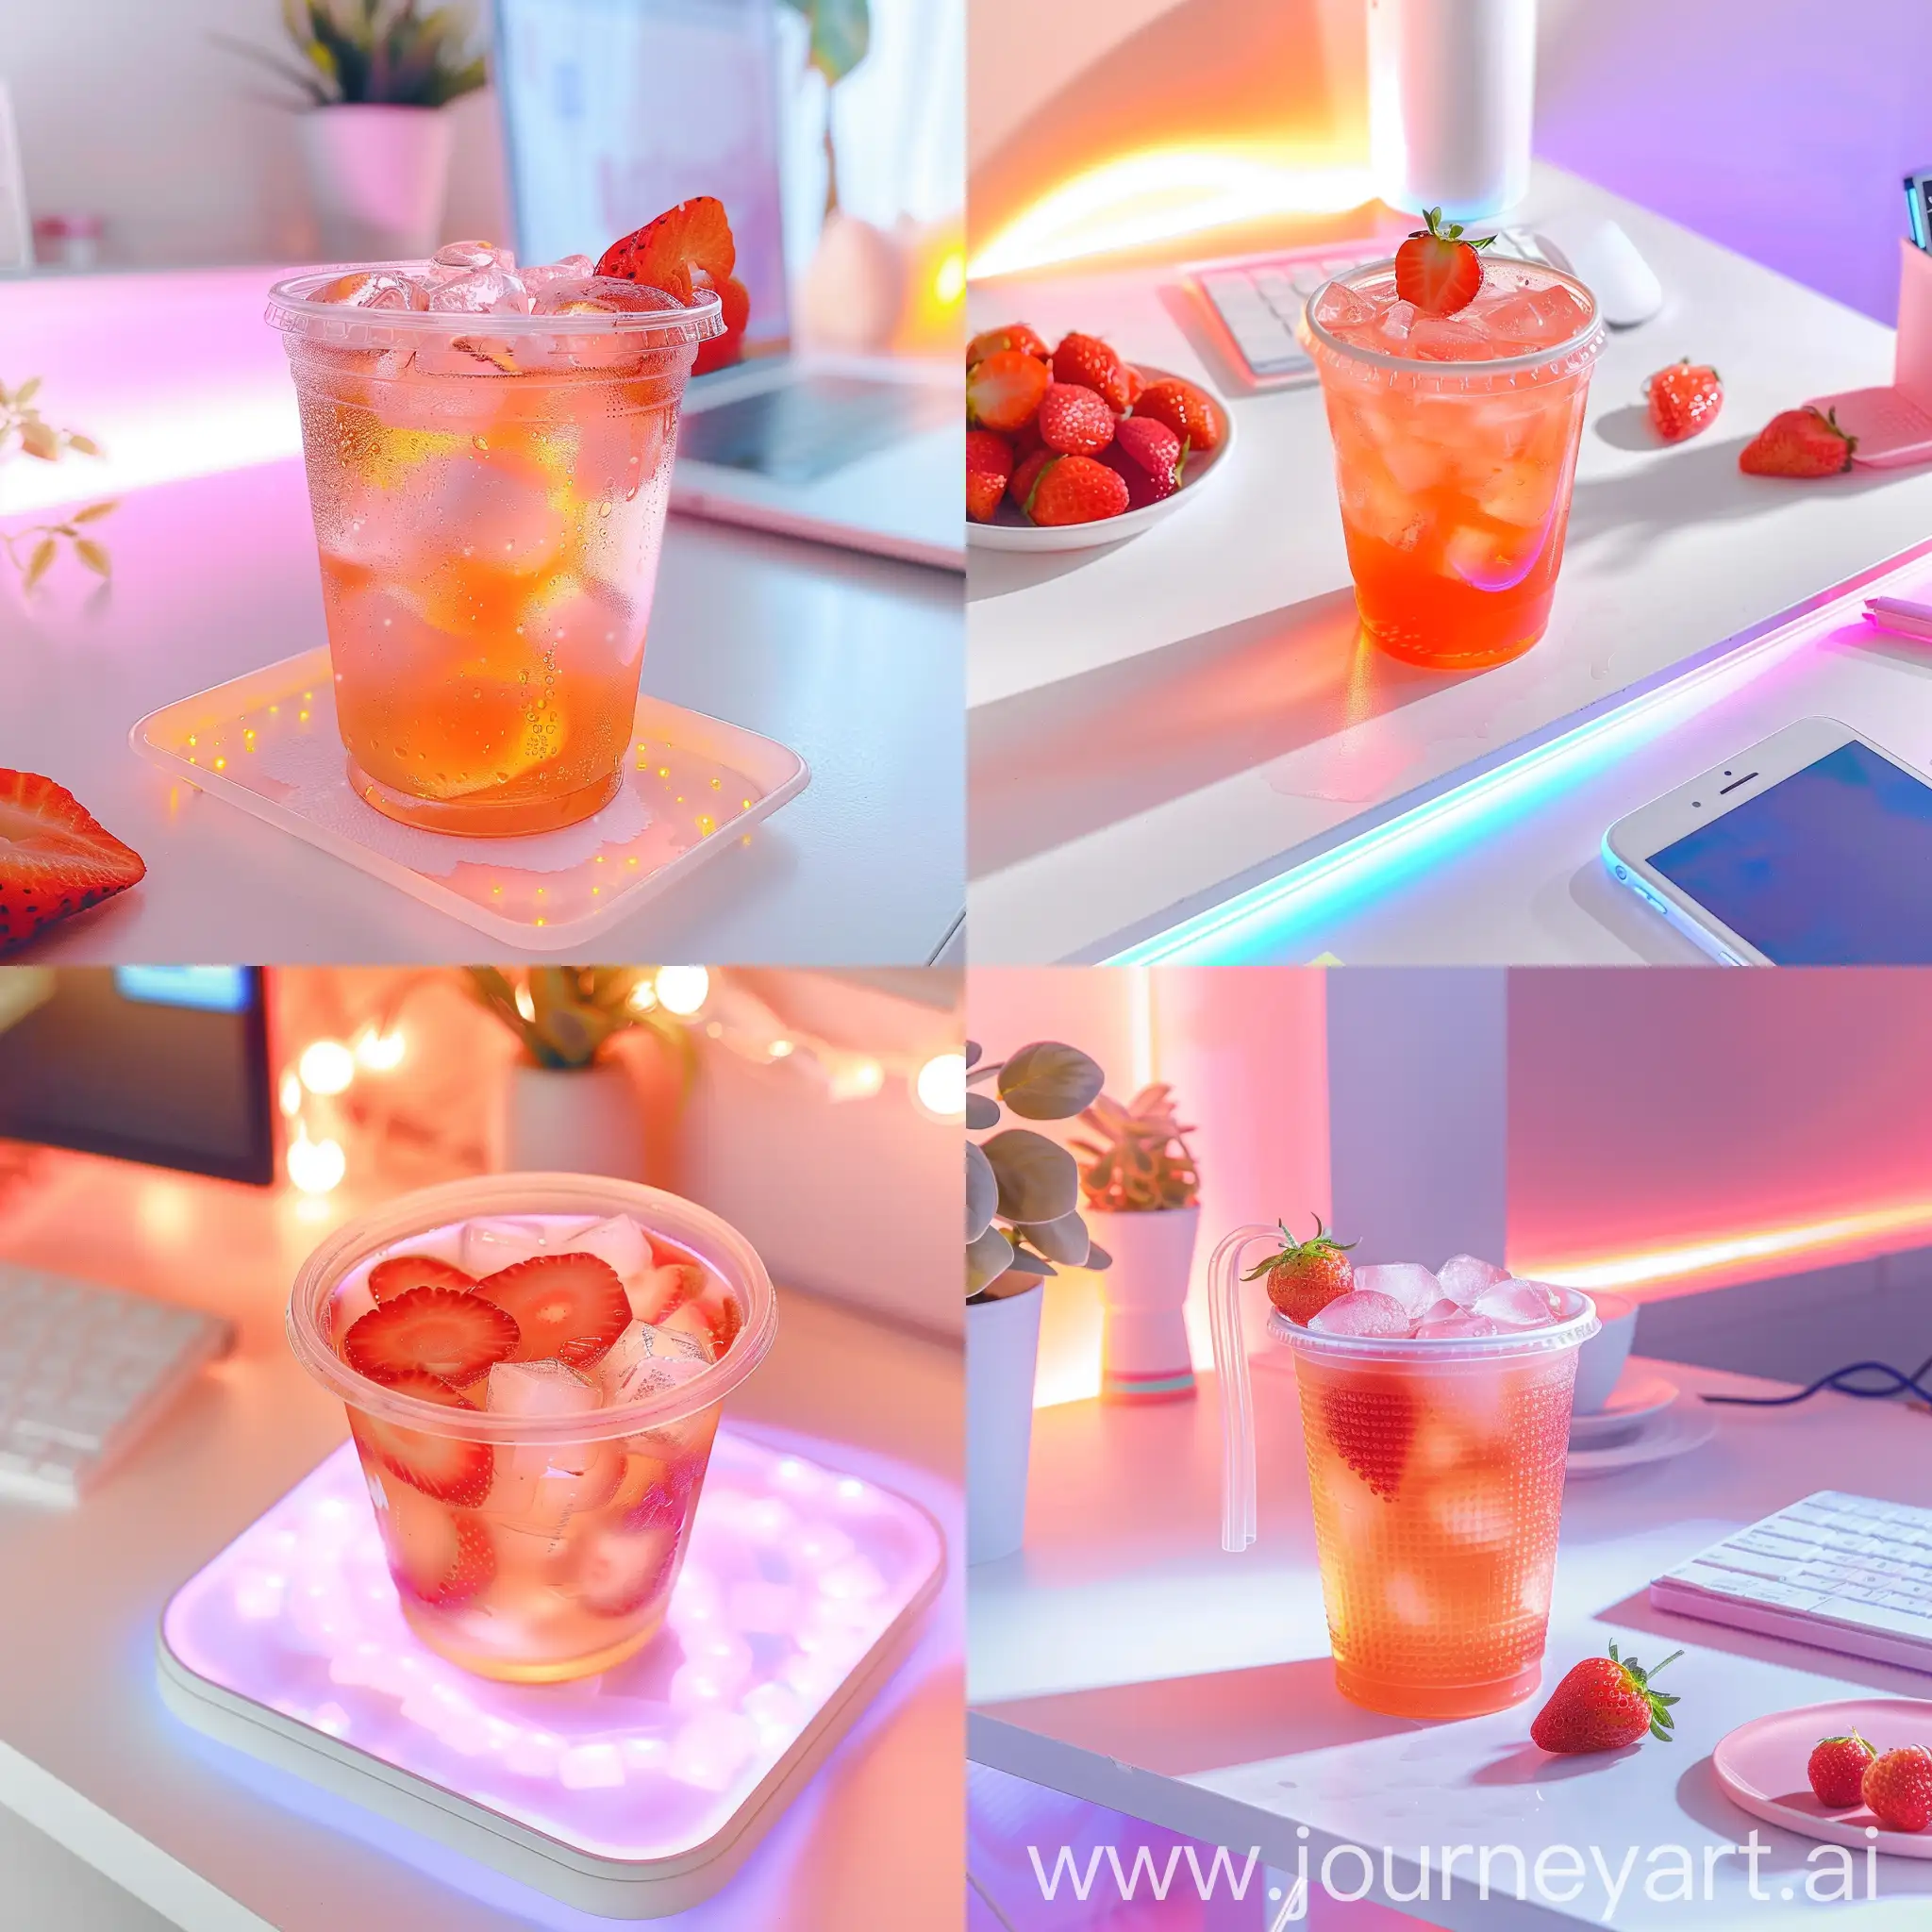 Aesthetic instagram post, strawberry iced tea in a cup on a white desk with pastel lighting 